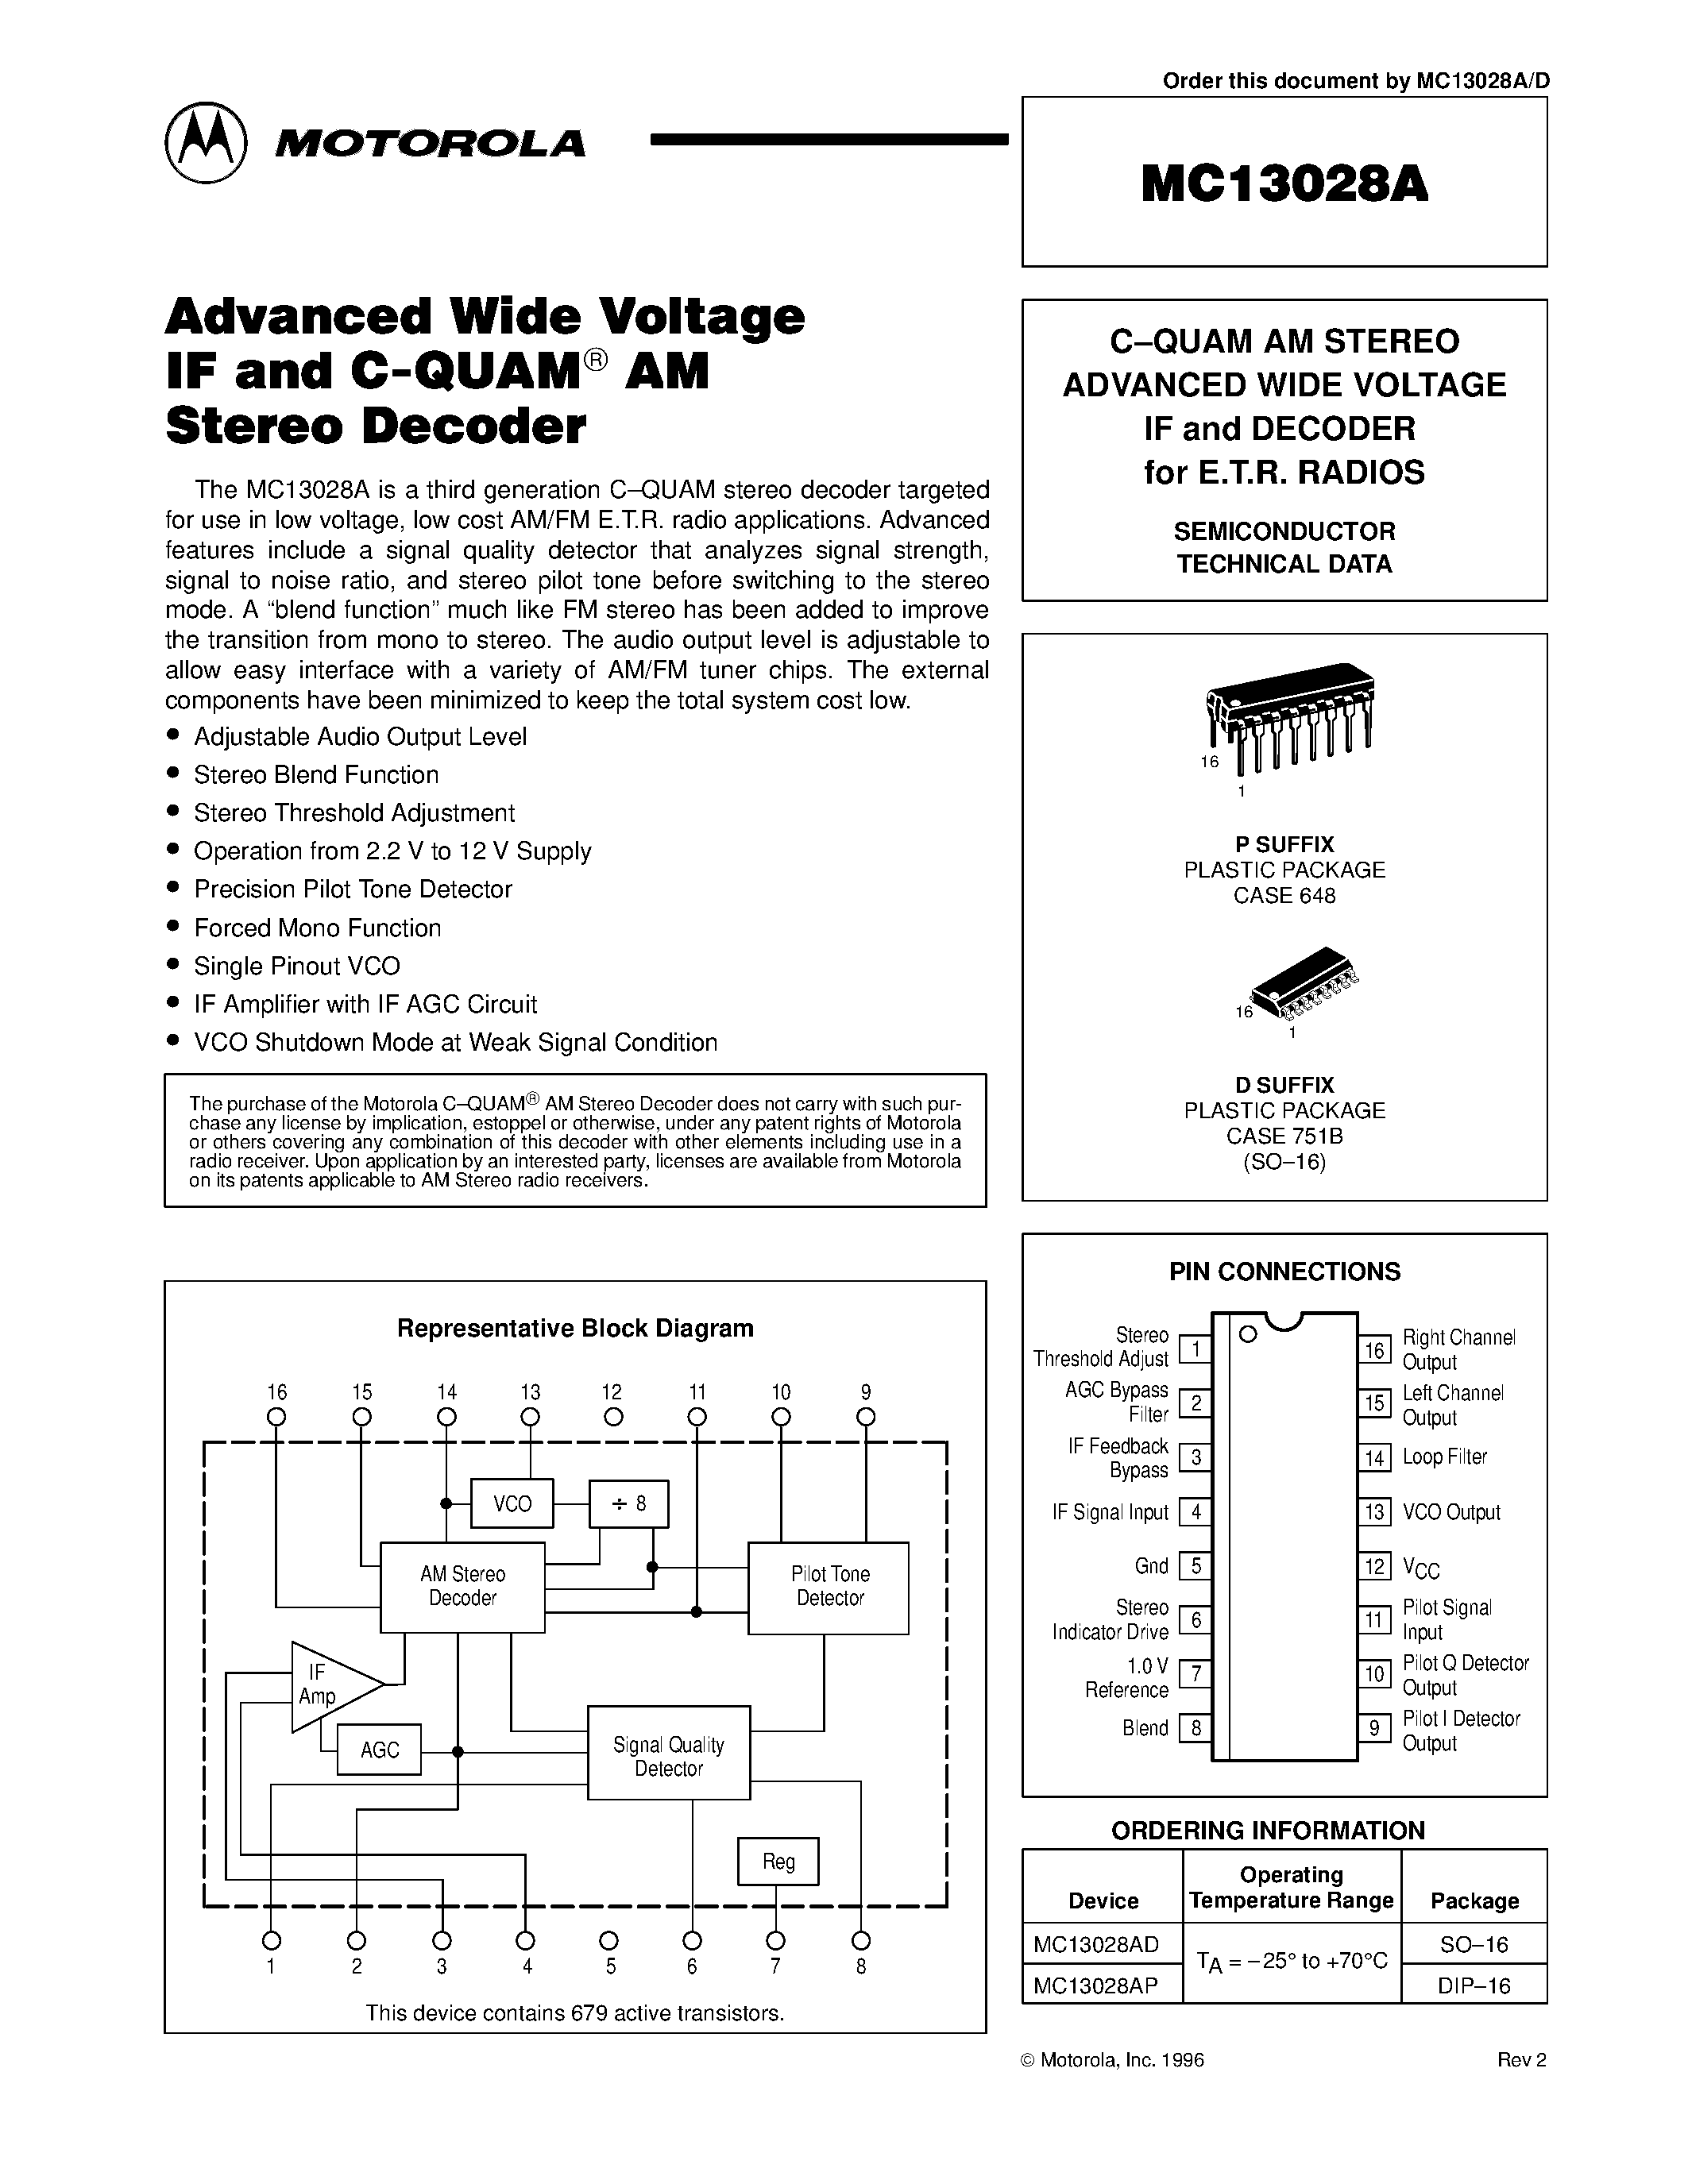 Datasheet MC13028AD - C-QUAM AM STEREO ADVANCED WIDE VOLTAGE IF and DECODER for E.T.R. RADIOS page 1